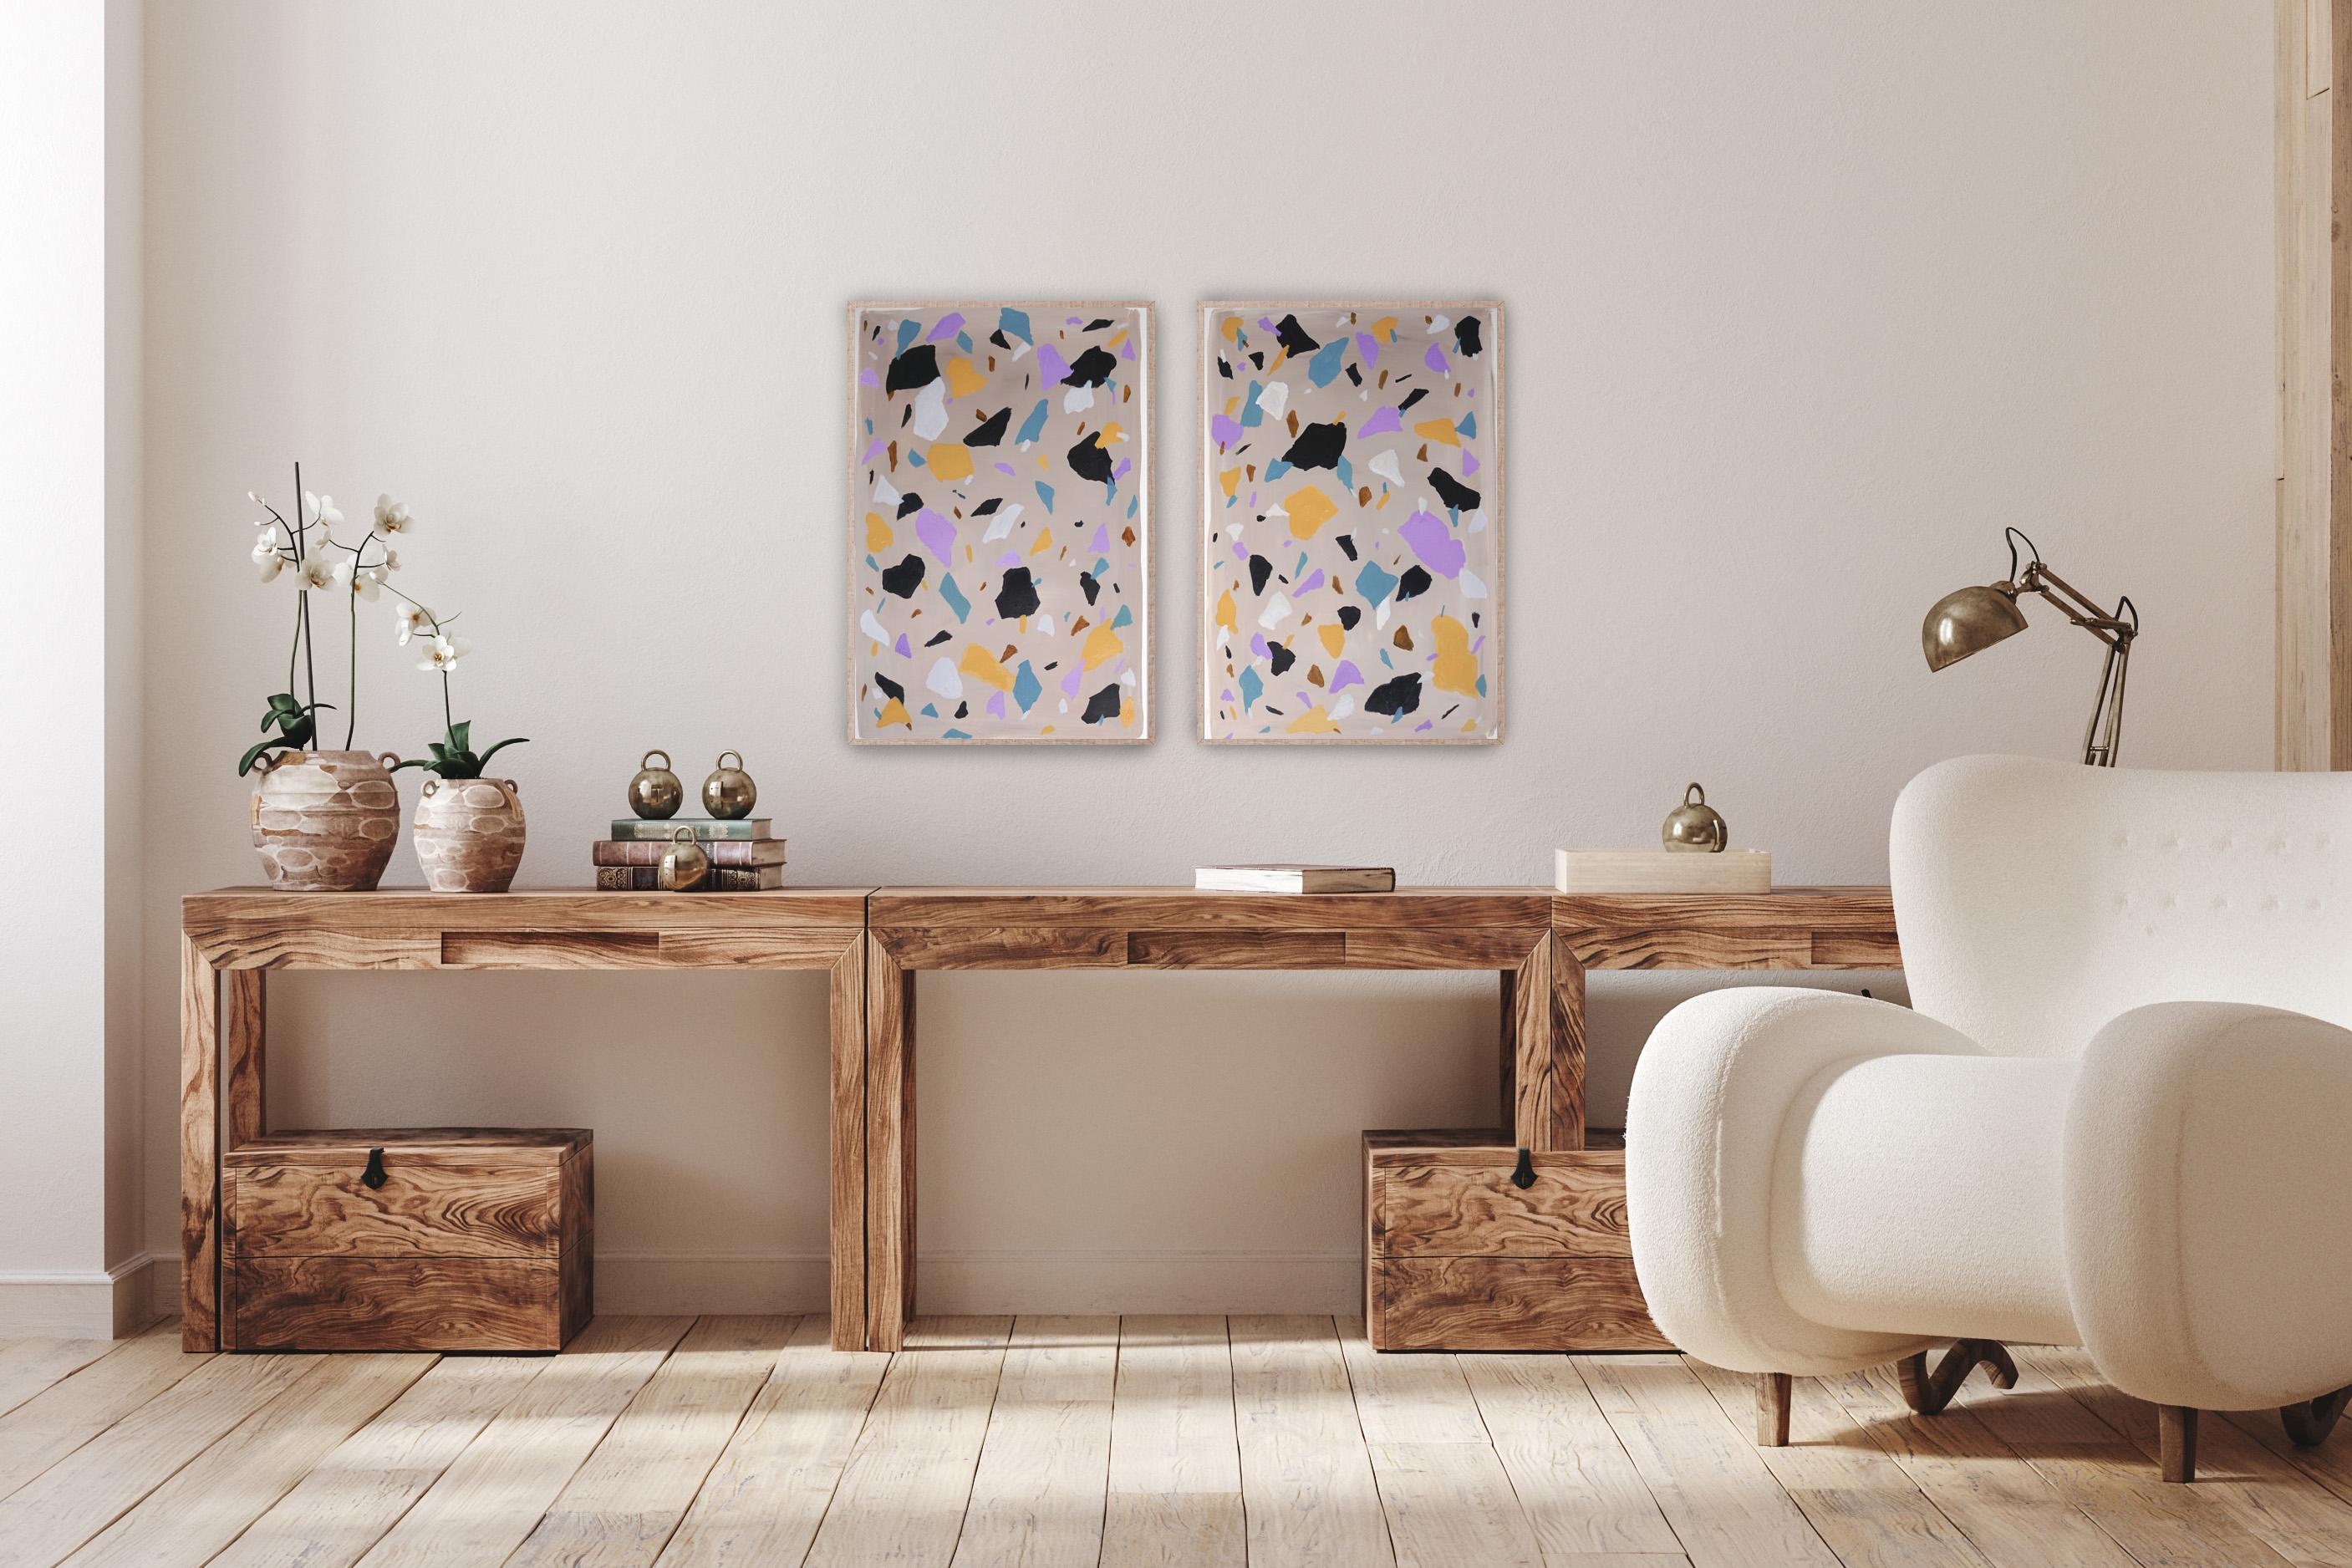 This series of hand painted acrylic paintings by Natalia Roman are inspired by the colors and textures of Italian terrazzo tiling. The patterns created combine a variety of vivid colors in the foreground with subtle background tones, painted on a